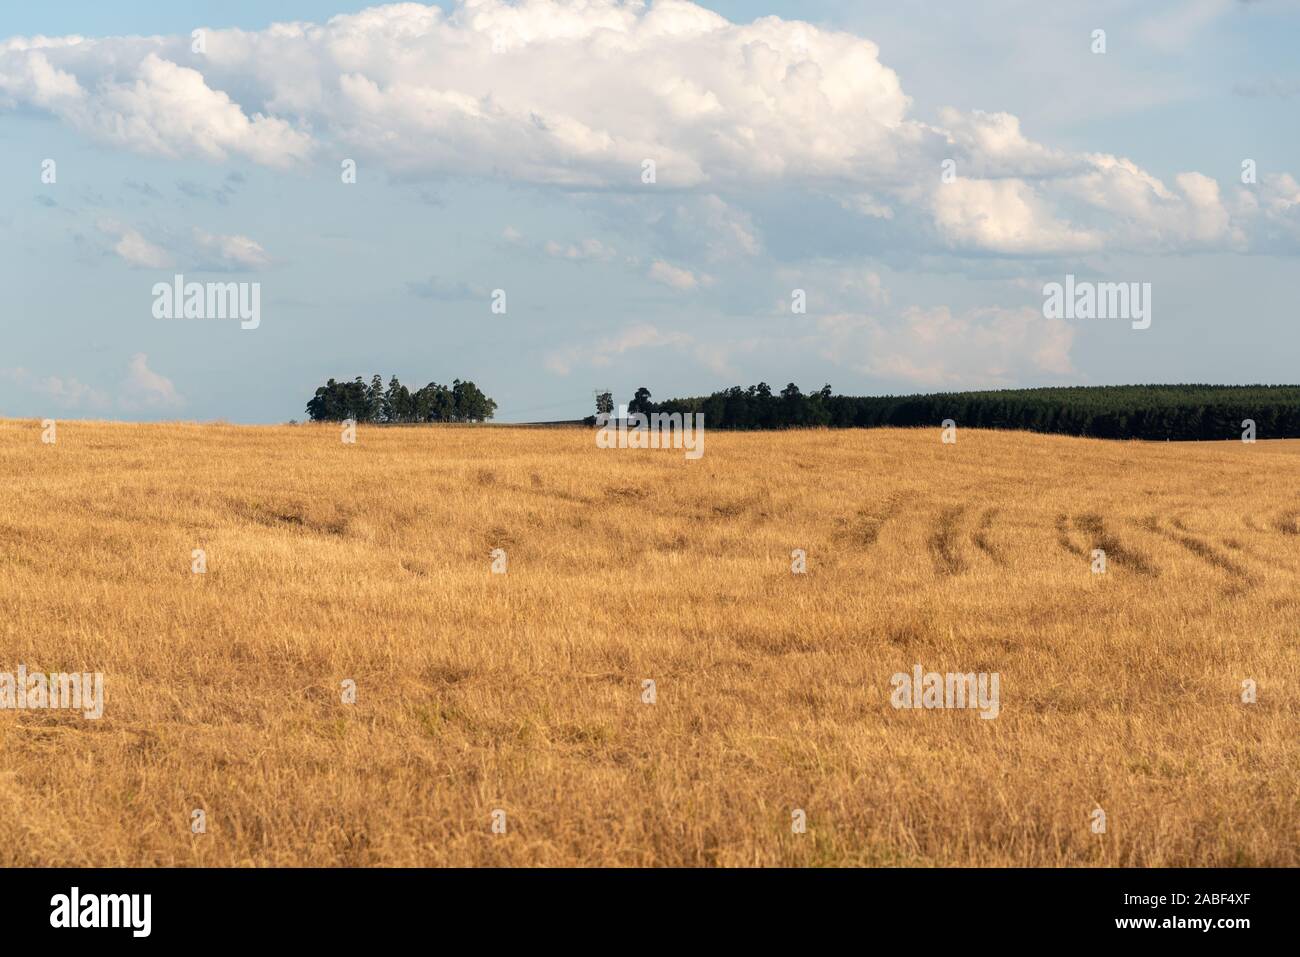 Rural landscape in southern Brazil. Agricultural production field in the soy region for human consumption. Stock Photo